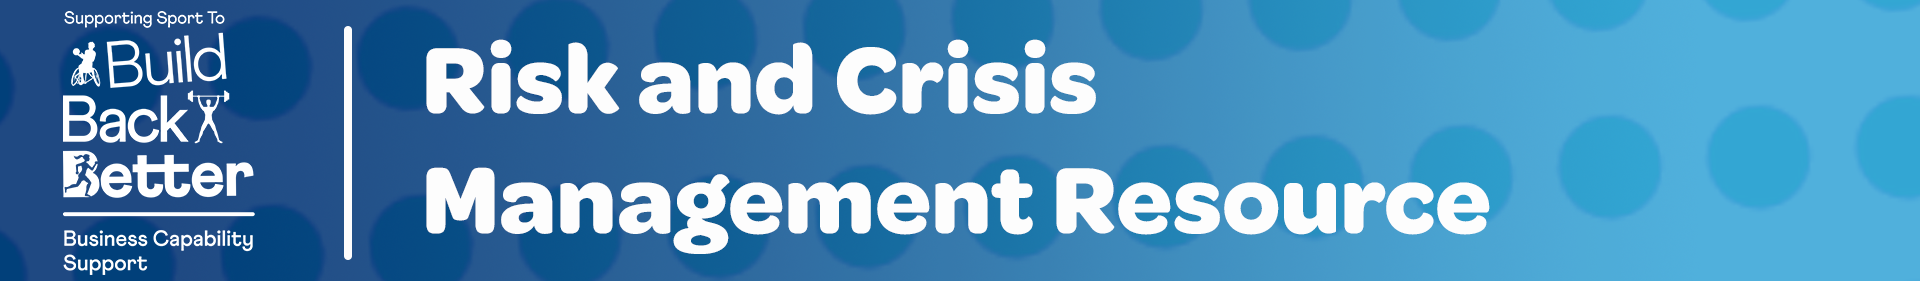 Risk and Crisis Management Resource